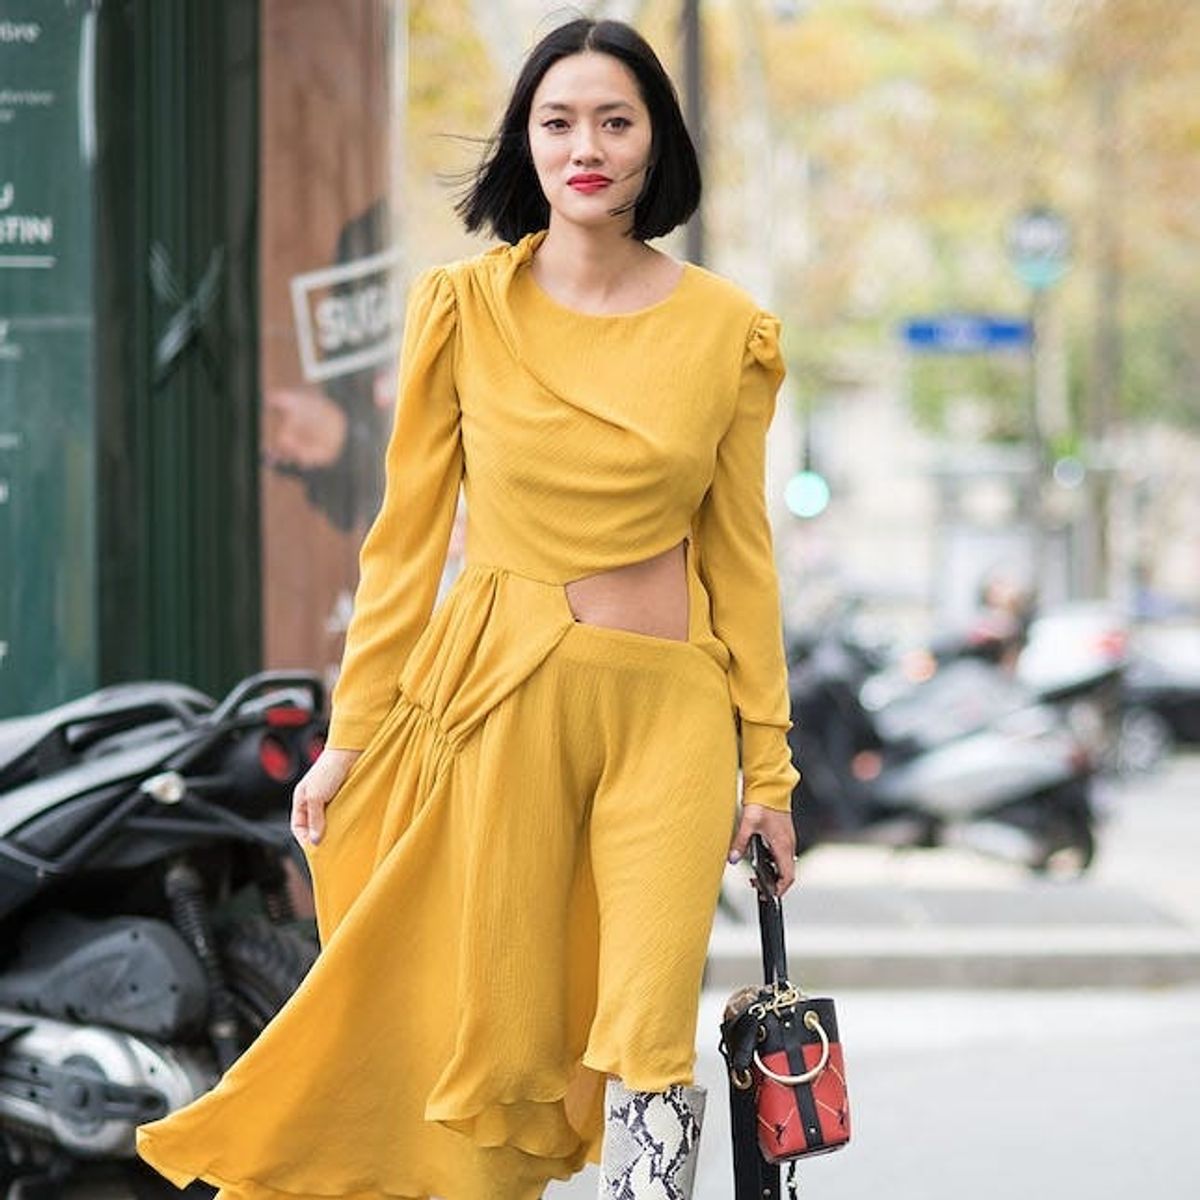 These 2019 Fashion Trends Are Already in Your Closet